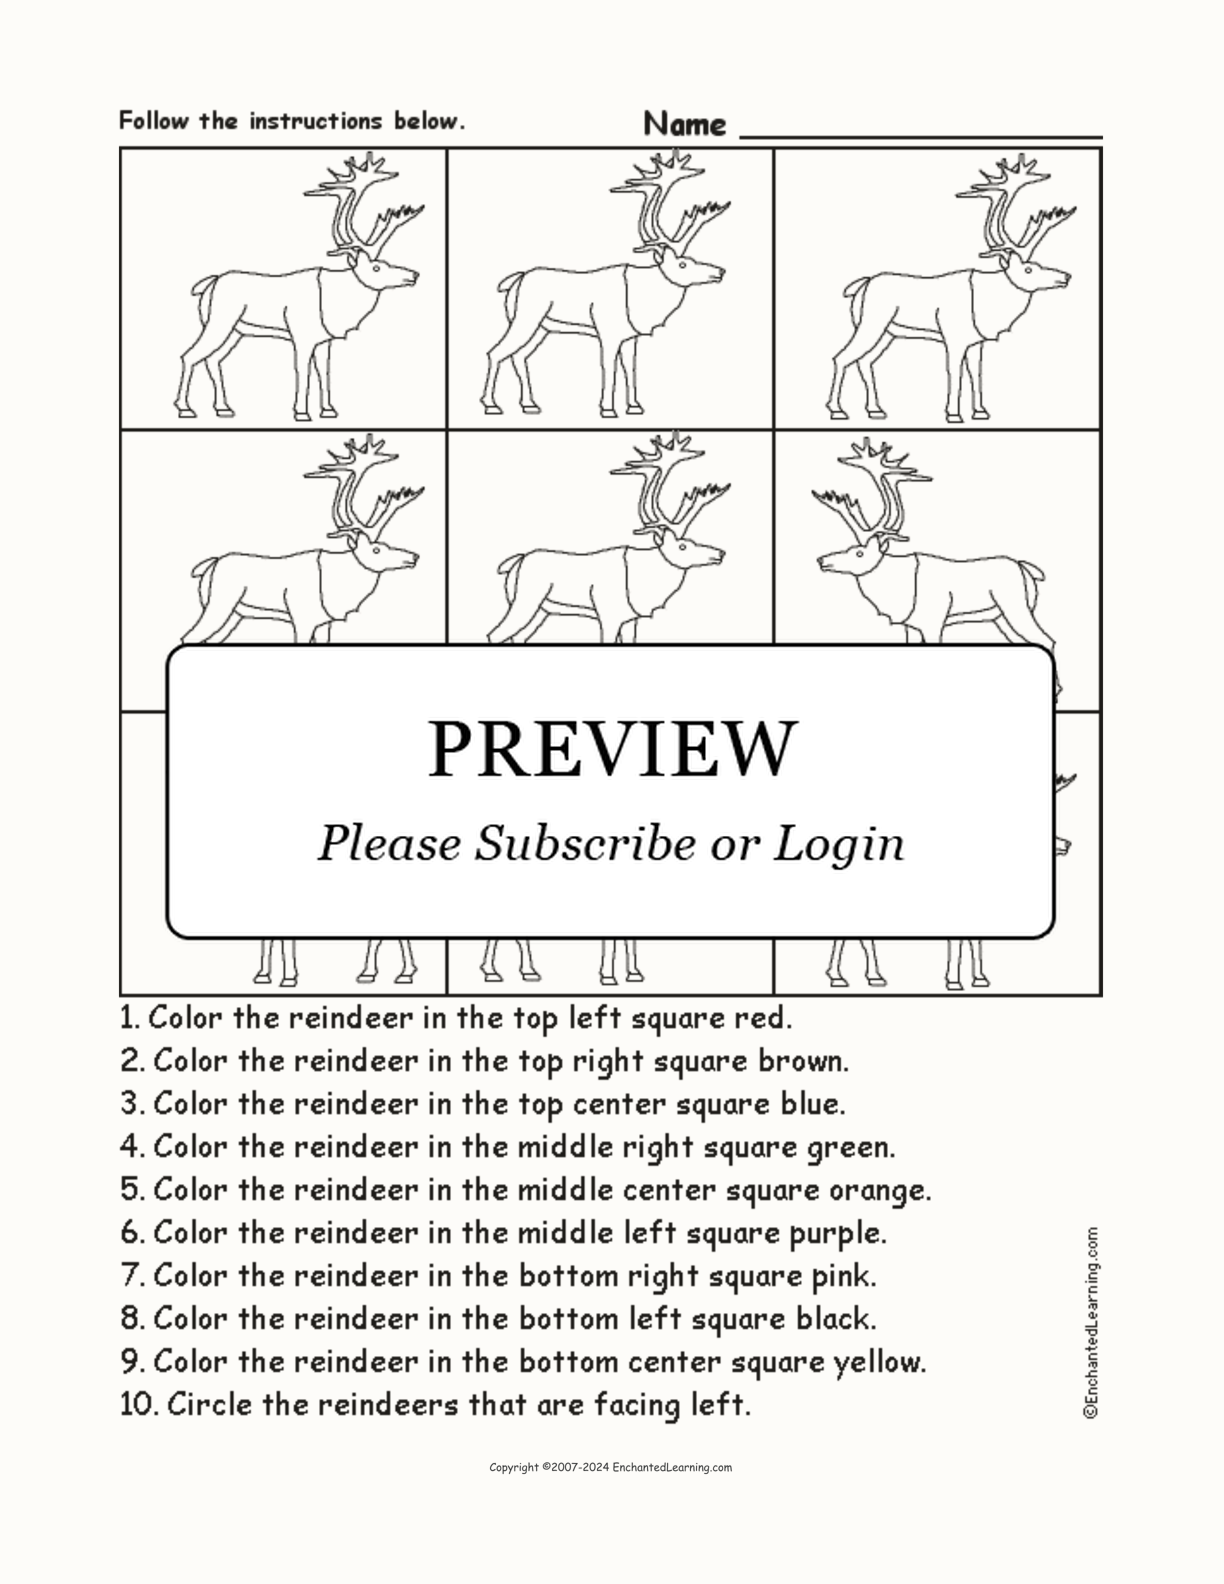 Reindeer - Follow the Instructions interactive worksheet page 1